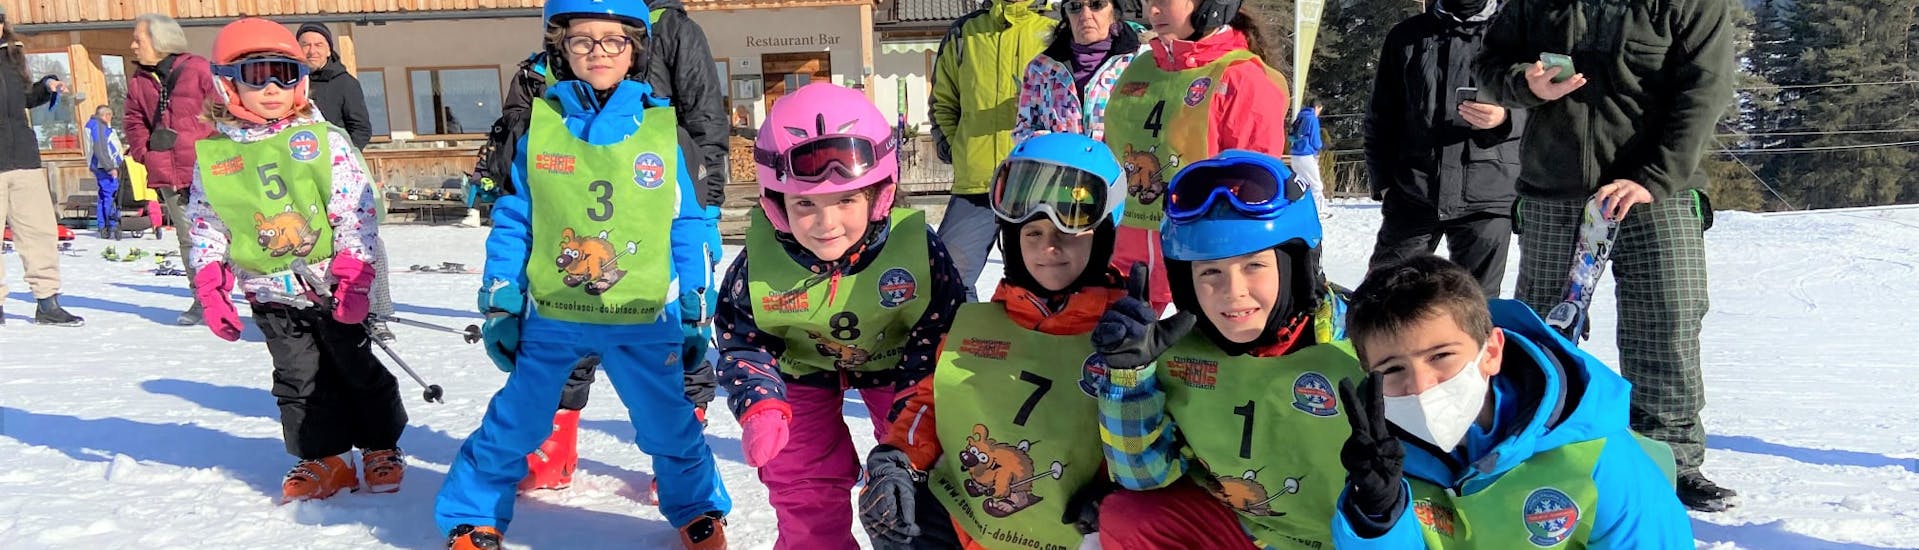 Group of kids at the base station after Kids Ski Lessons for Advanced with Ski School Dobbiaco.